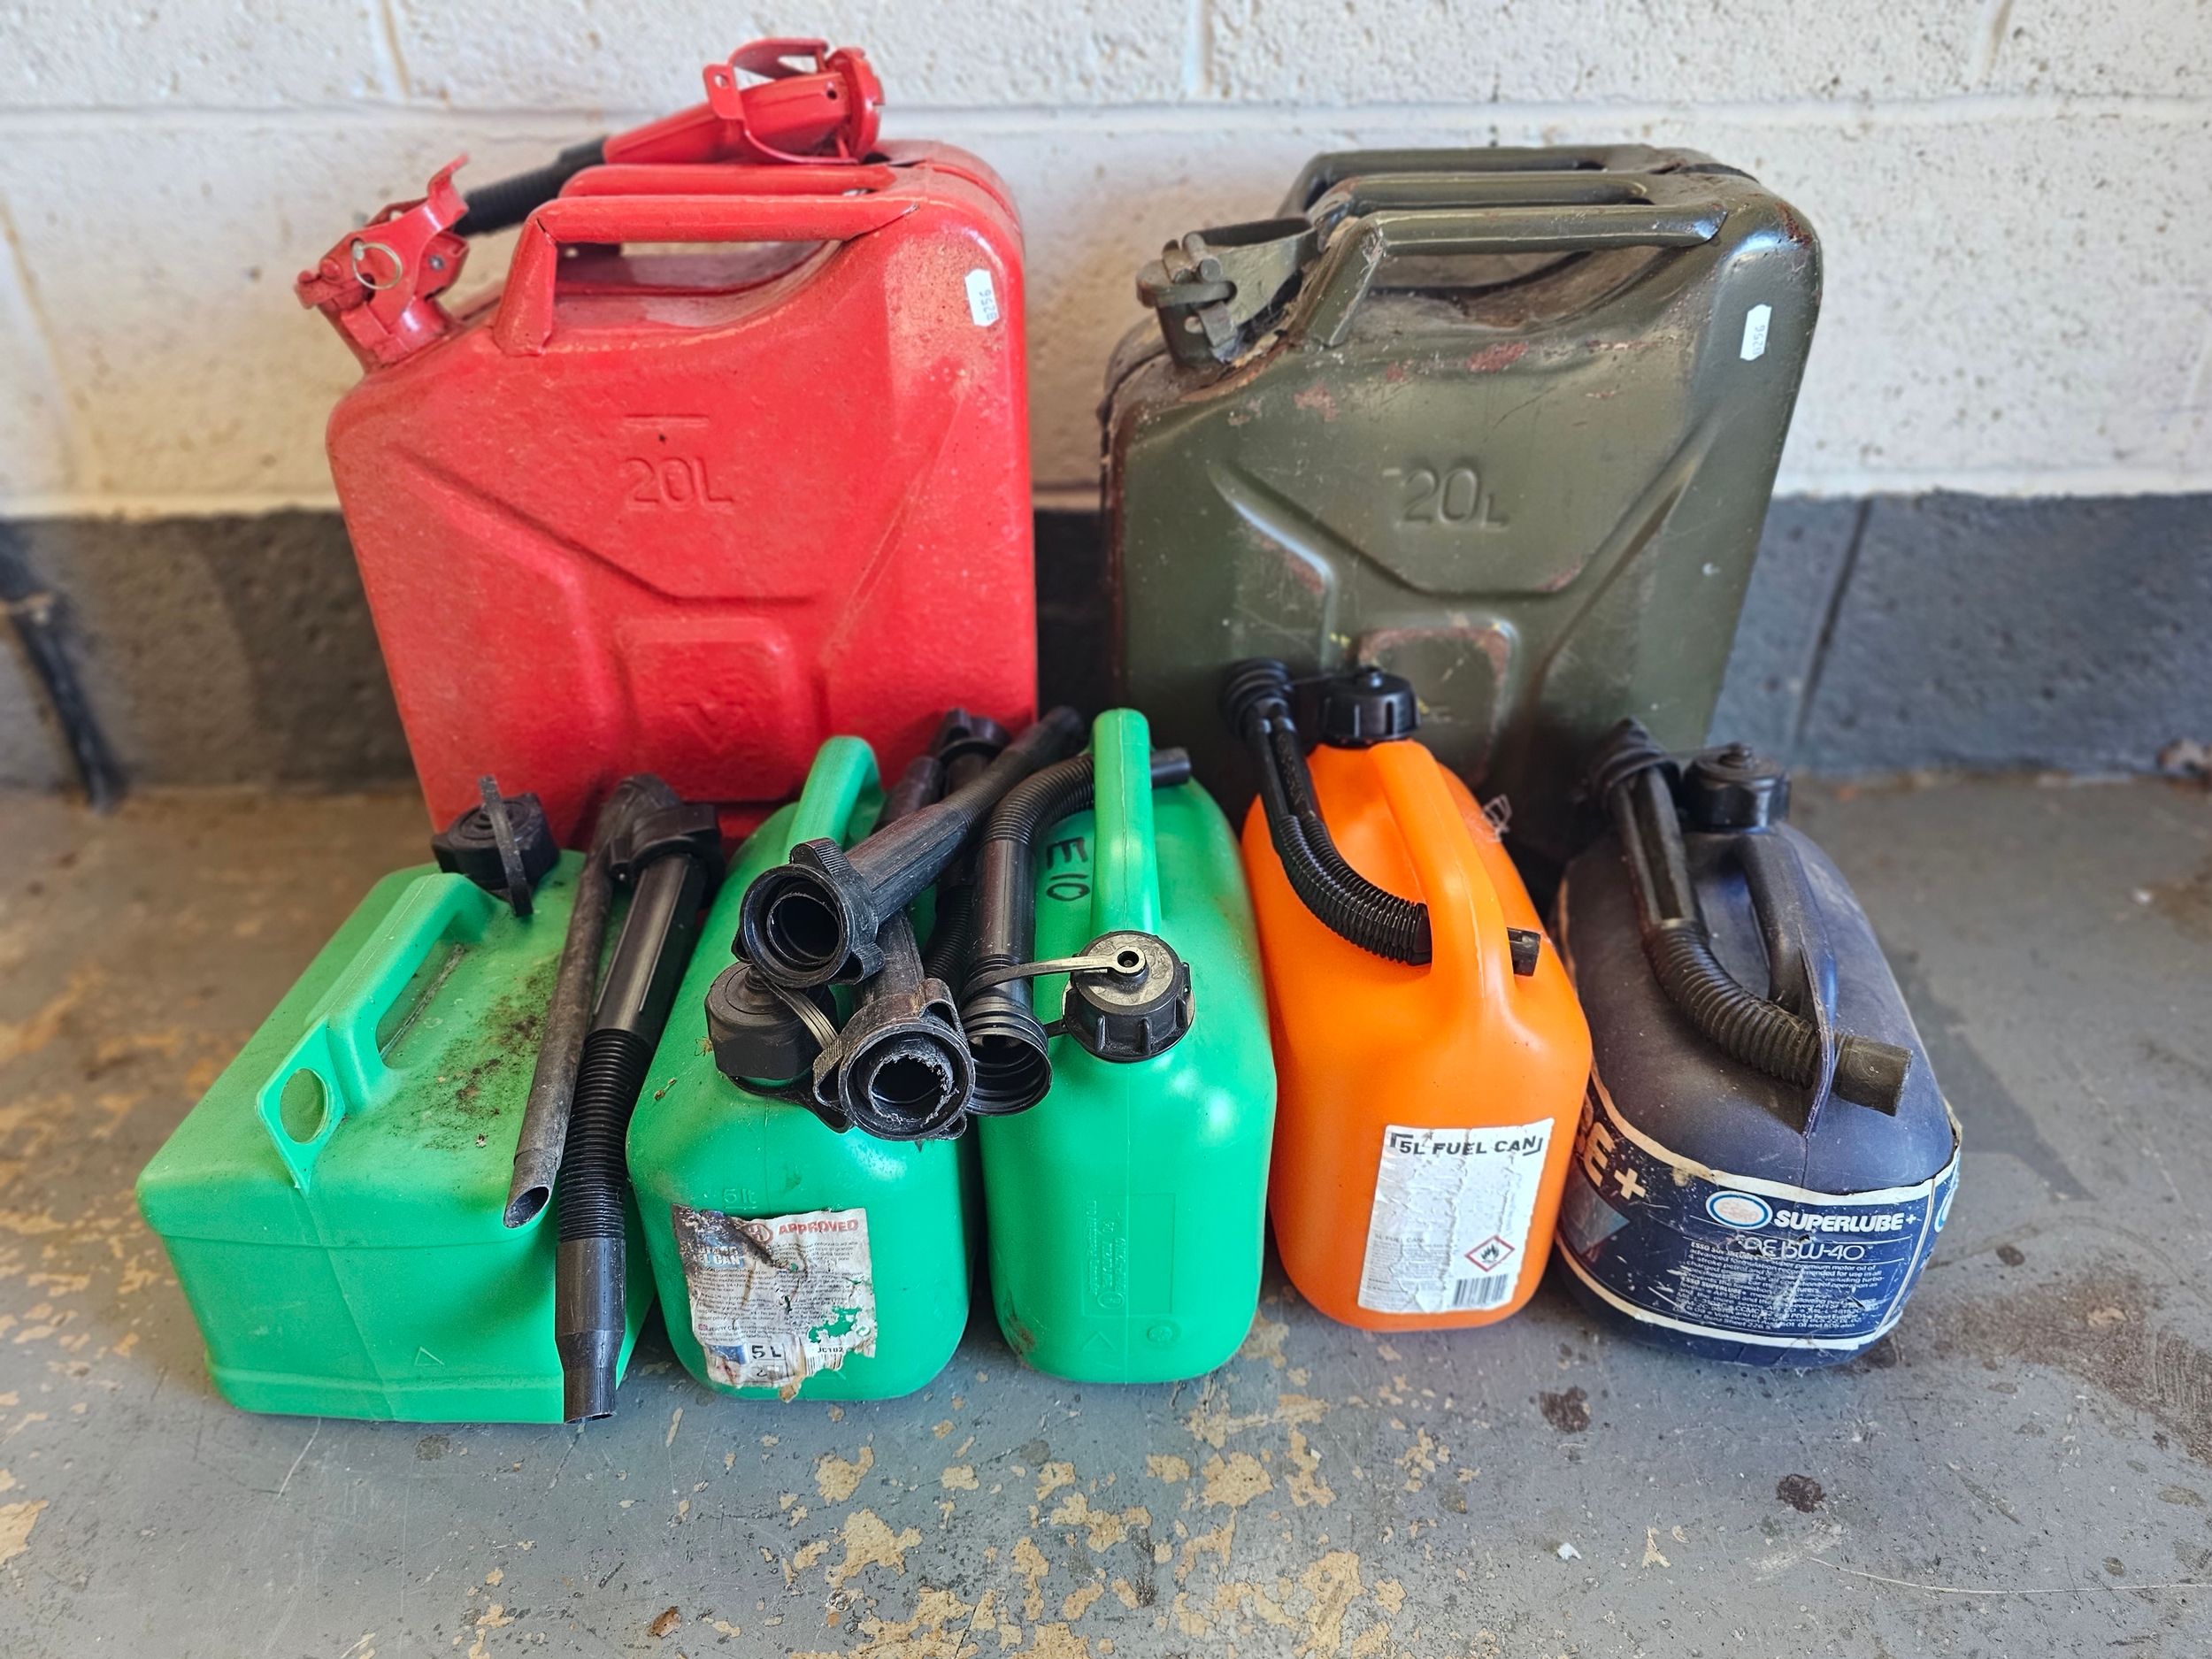 Two 20lt Jerry cans, and five plastic 1 gallon cans